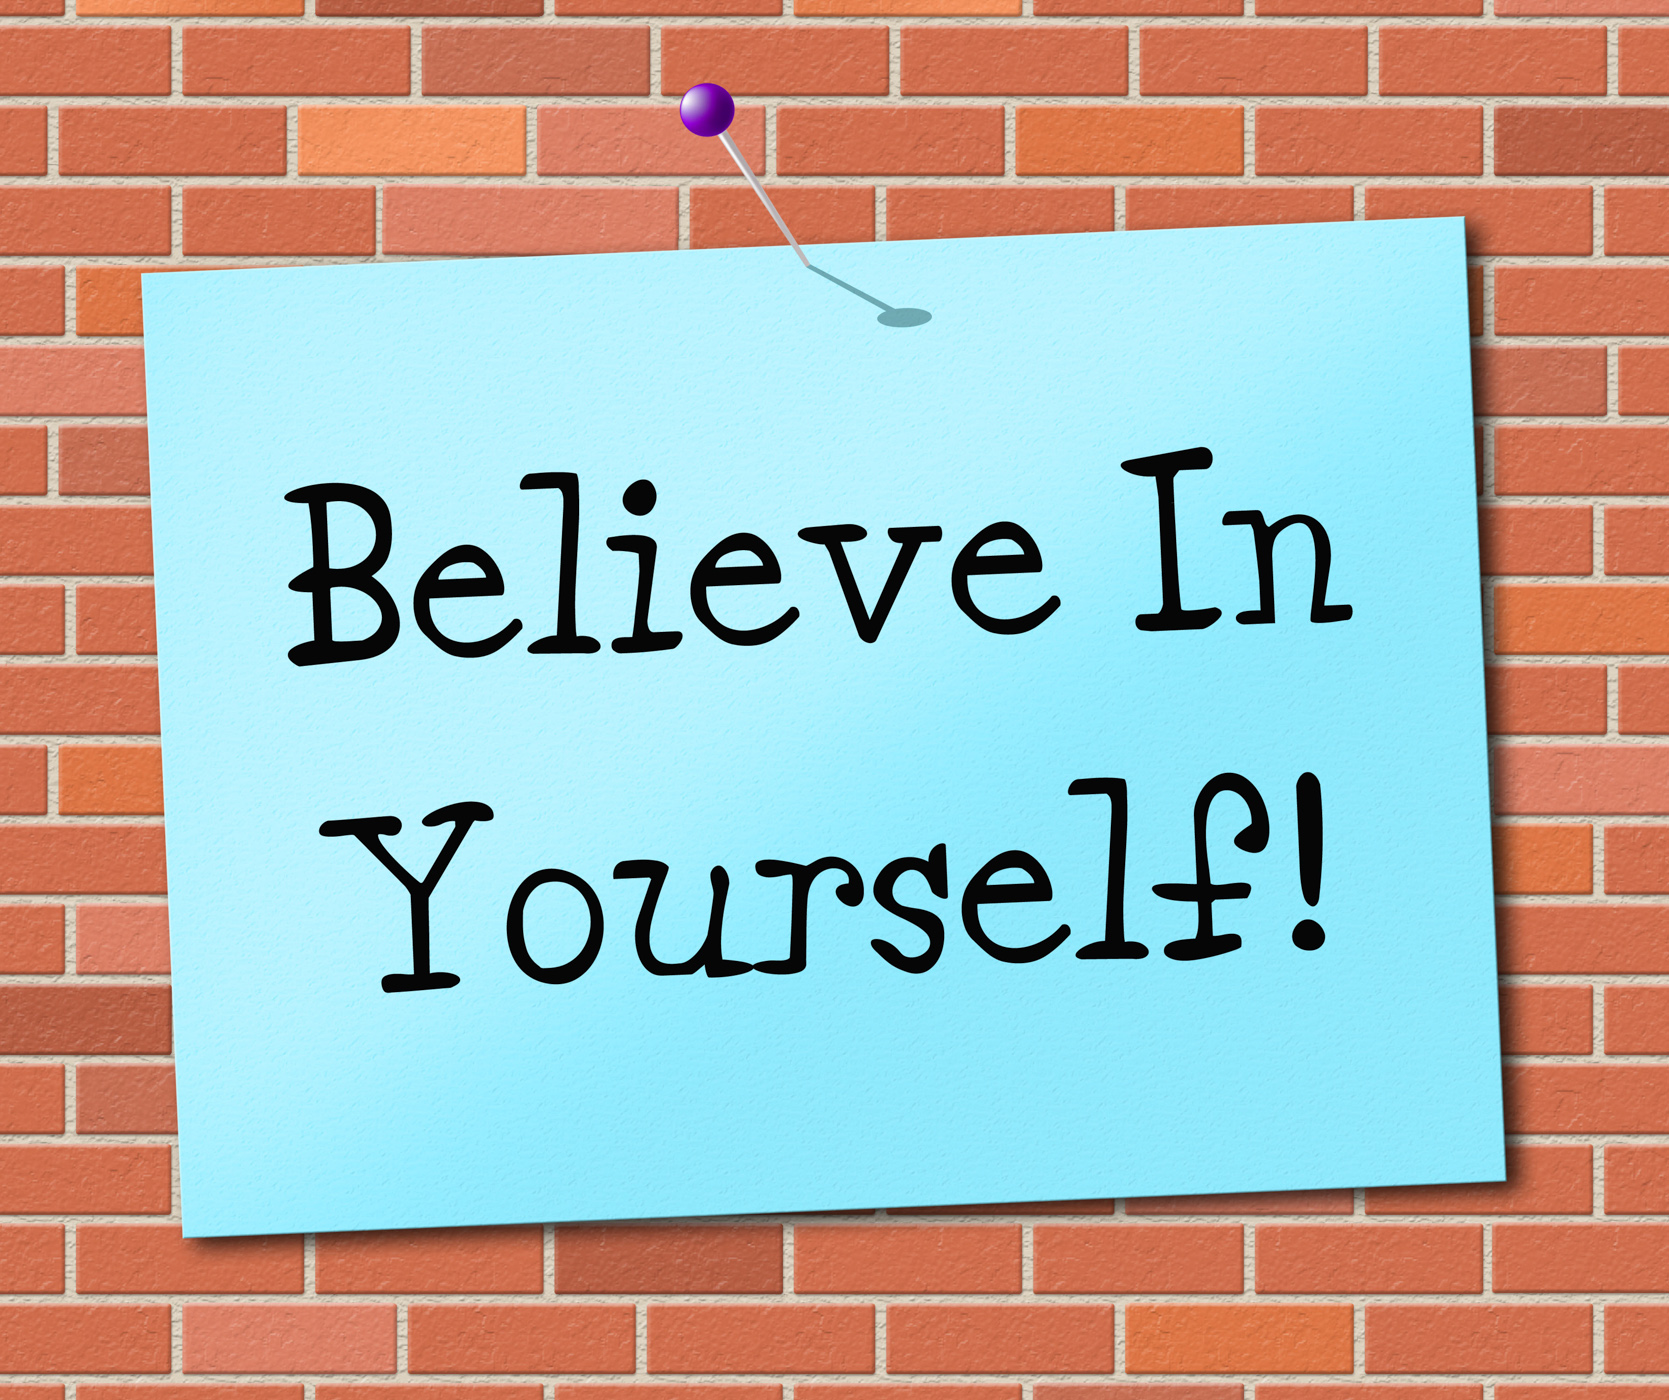 Believe In Yourself Represents Believing Belief And Confidence, Belief, Beliefs, Believe, Believeinyoursel, HQ Photo